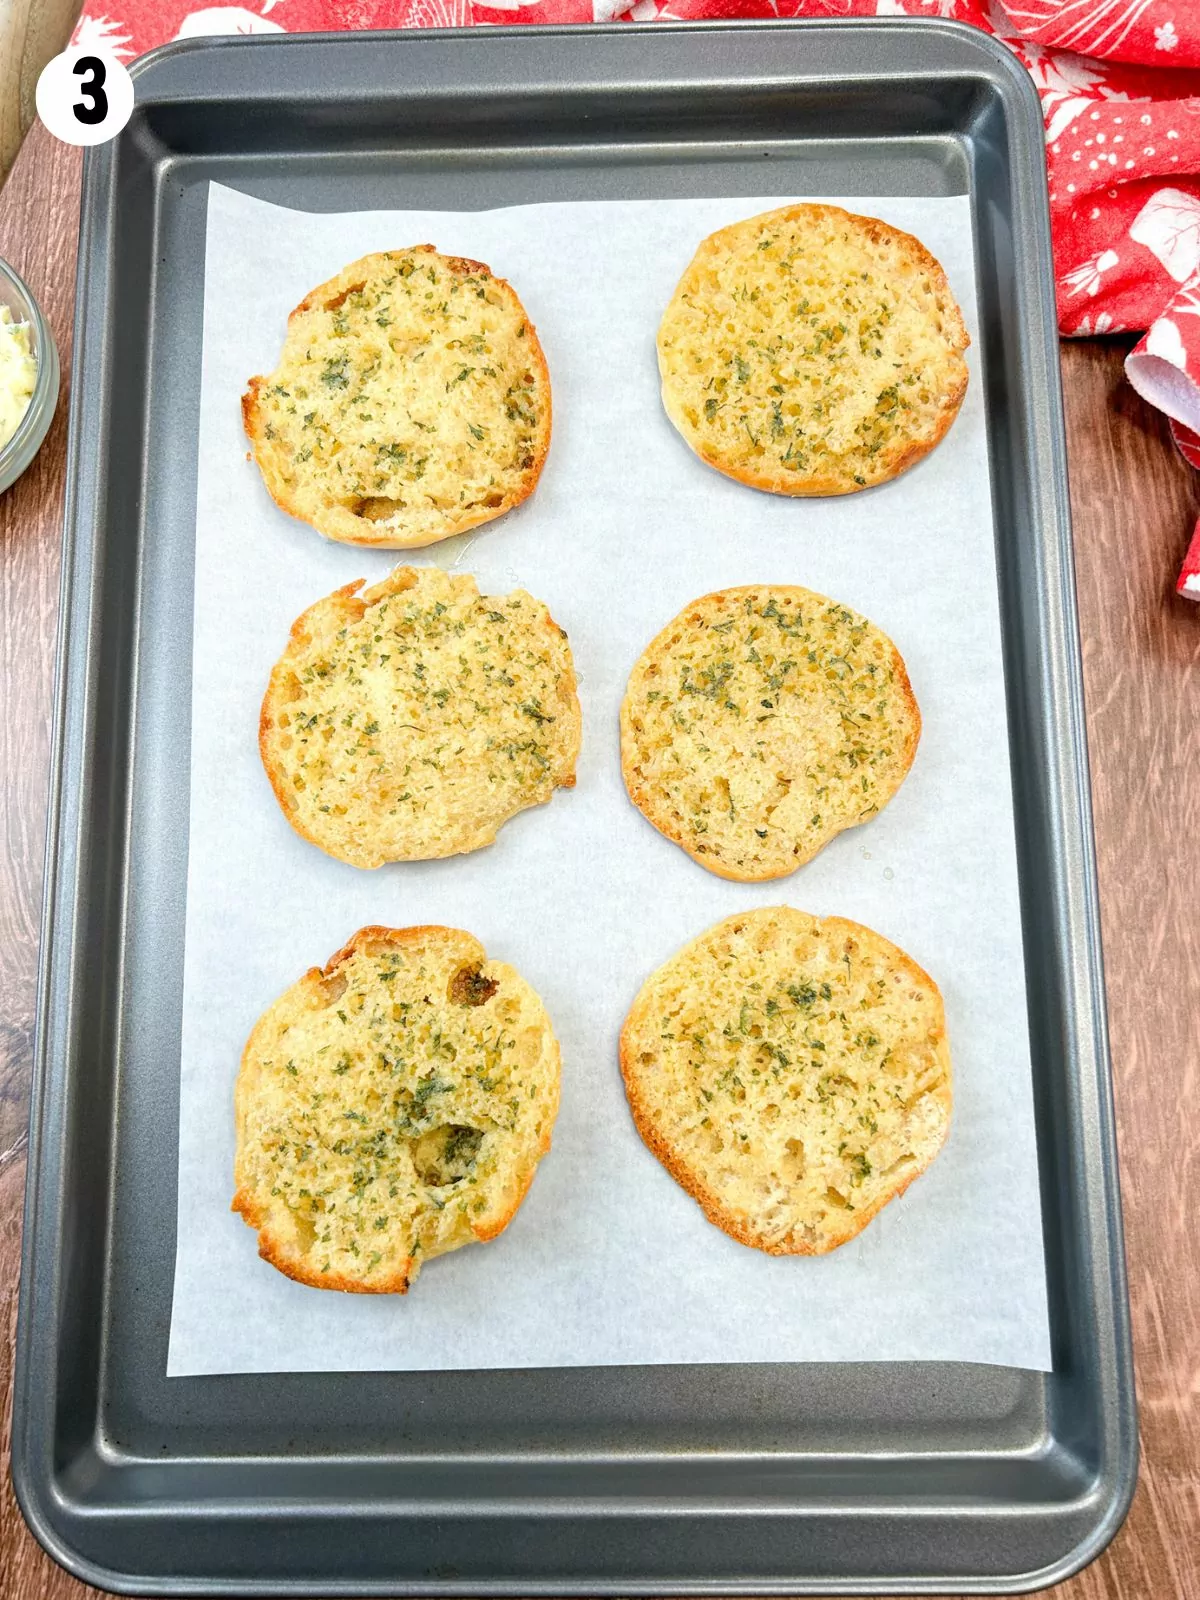 toasted English muffins with homemade garlic butter on baking tray.